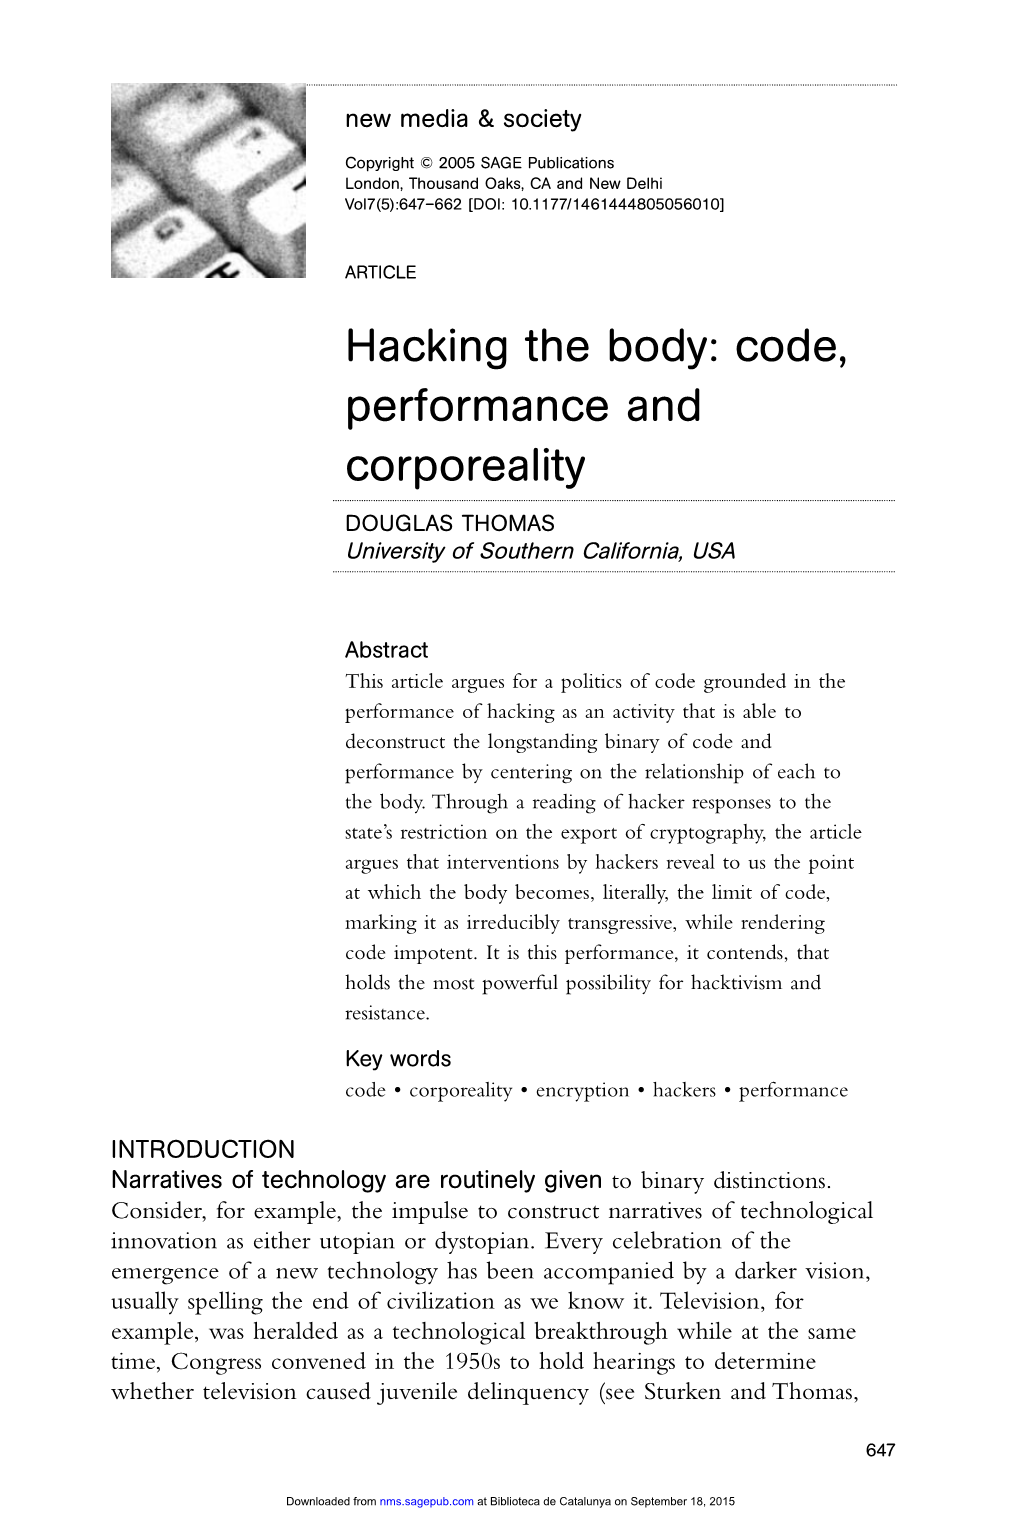 Hacking the Body: Code, Performance and Corporeality